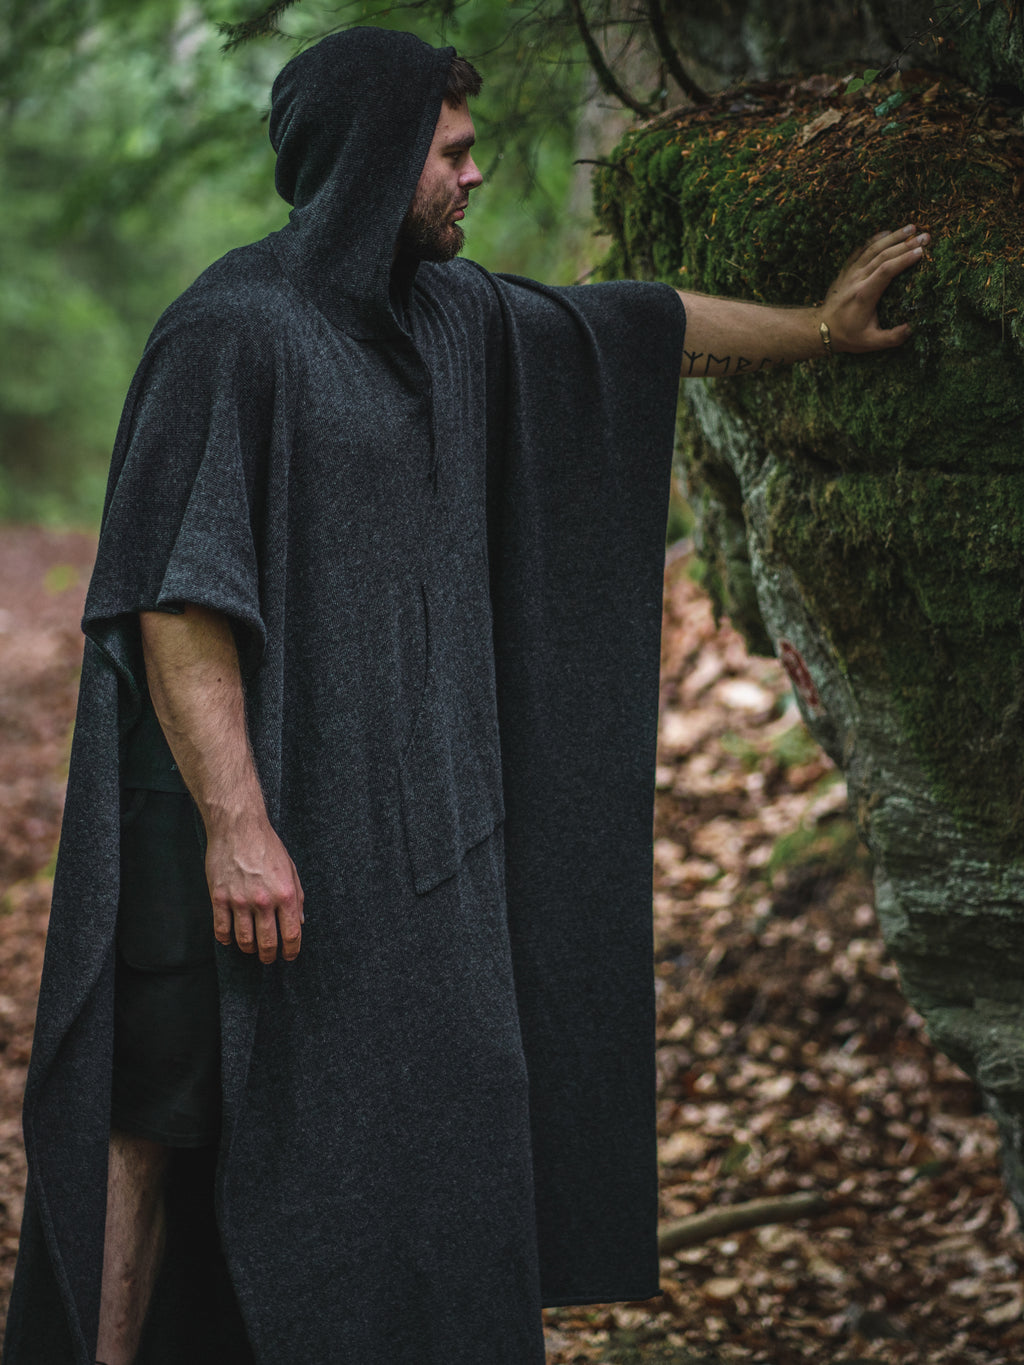 Kveldsongr, Descended from Odin, Wanderers Warriors,Organic T-shirts, Staithes Hoodie, Merino Wool Hoodie, Odin, TYR, Thor, Ragnar, Bjorn Ironside, Vikings, Anglo Saxon, Norse, Fitness Gear, Horns, Jewellery, Silver